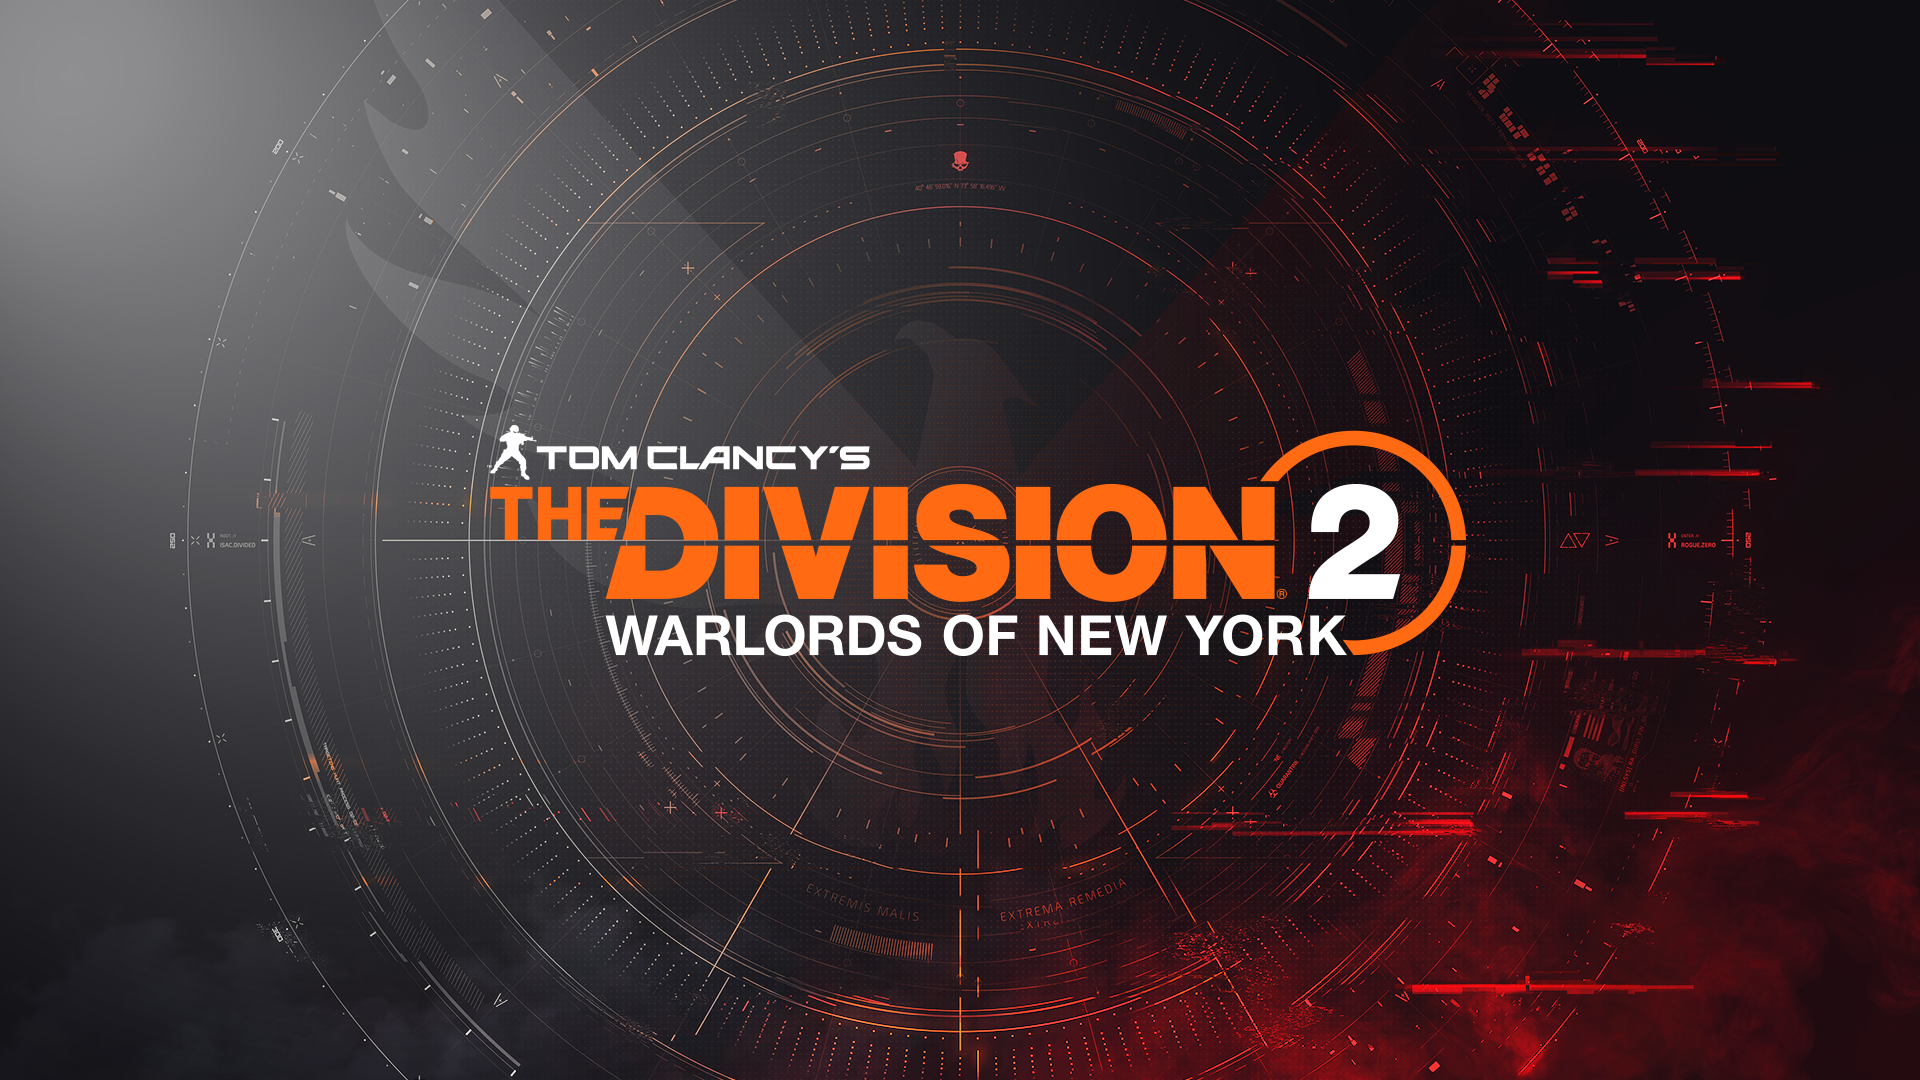 General 1920x1080 Tom Clancy's The Division 2 video game art game logo